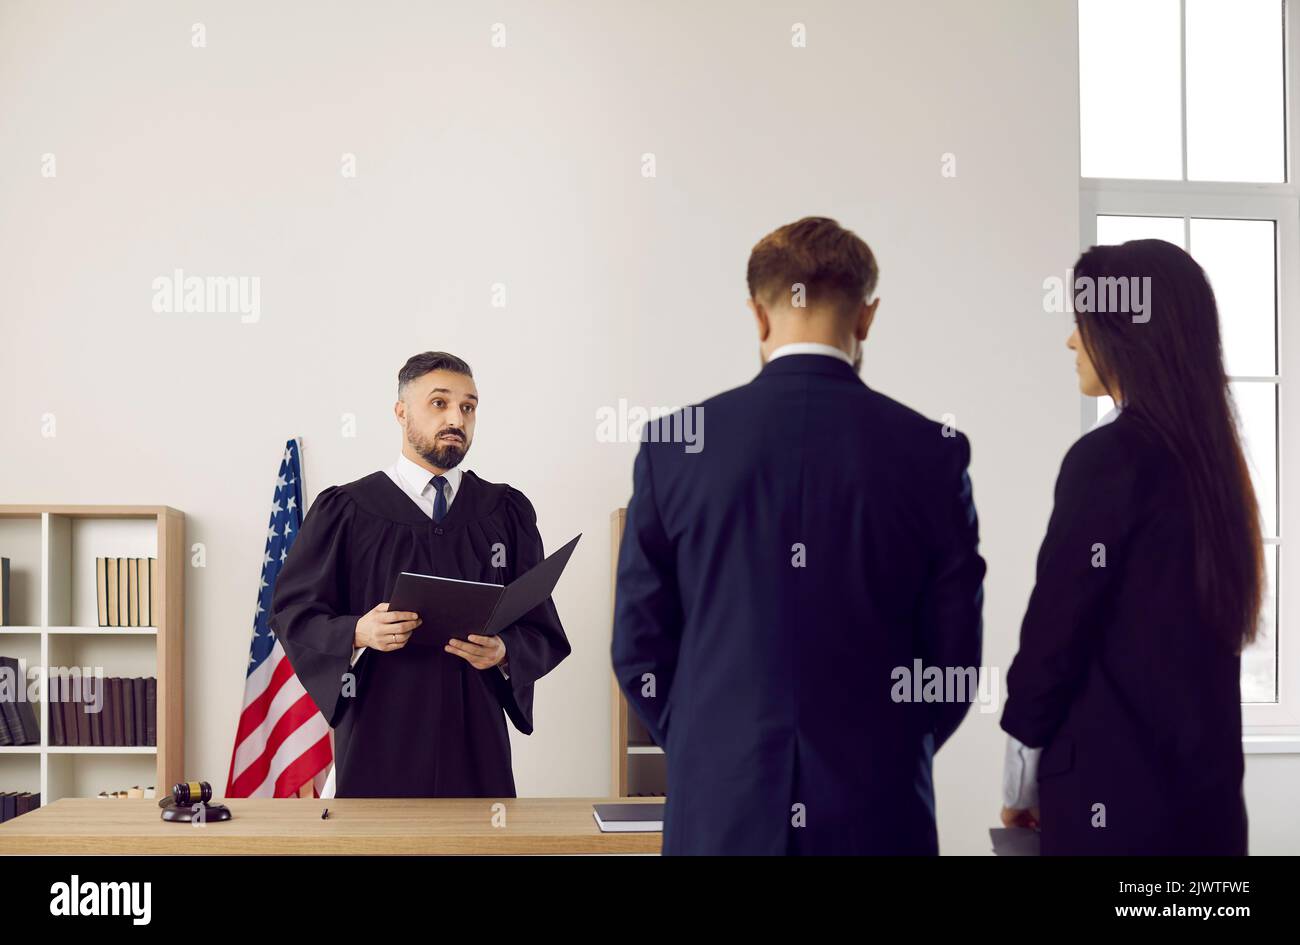 Judge in American courthouse gives judgment and enforces punishment on young man Stock Photo